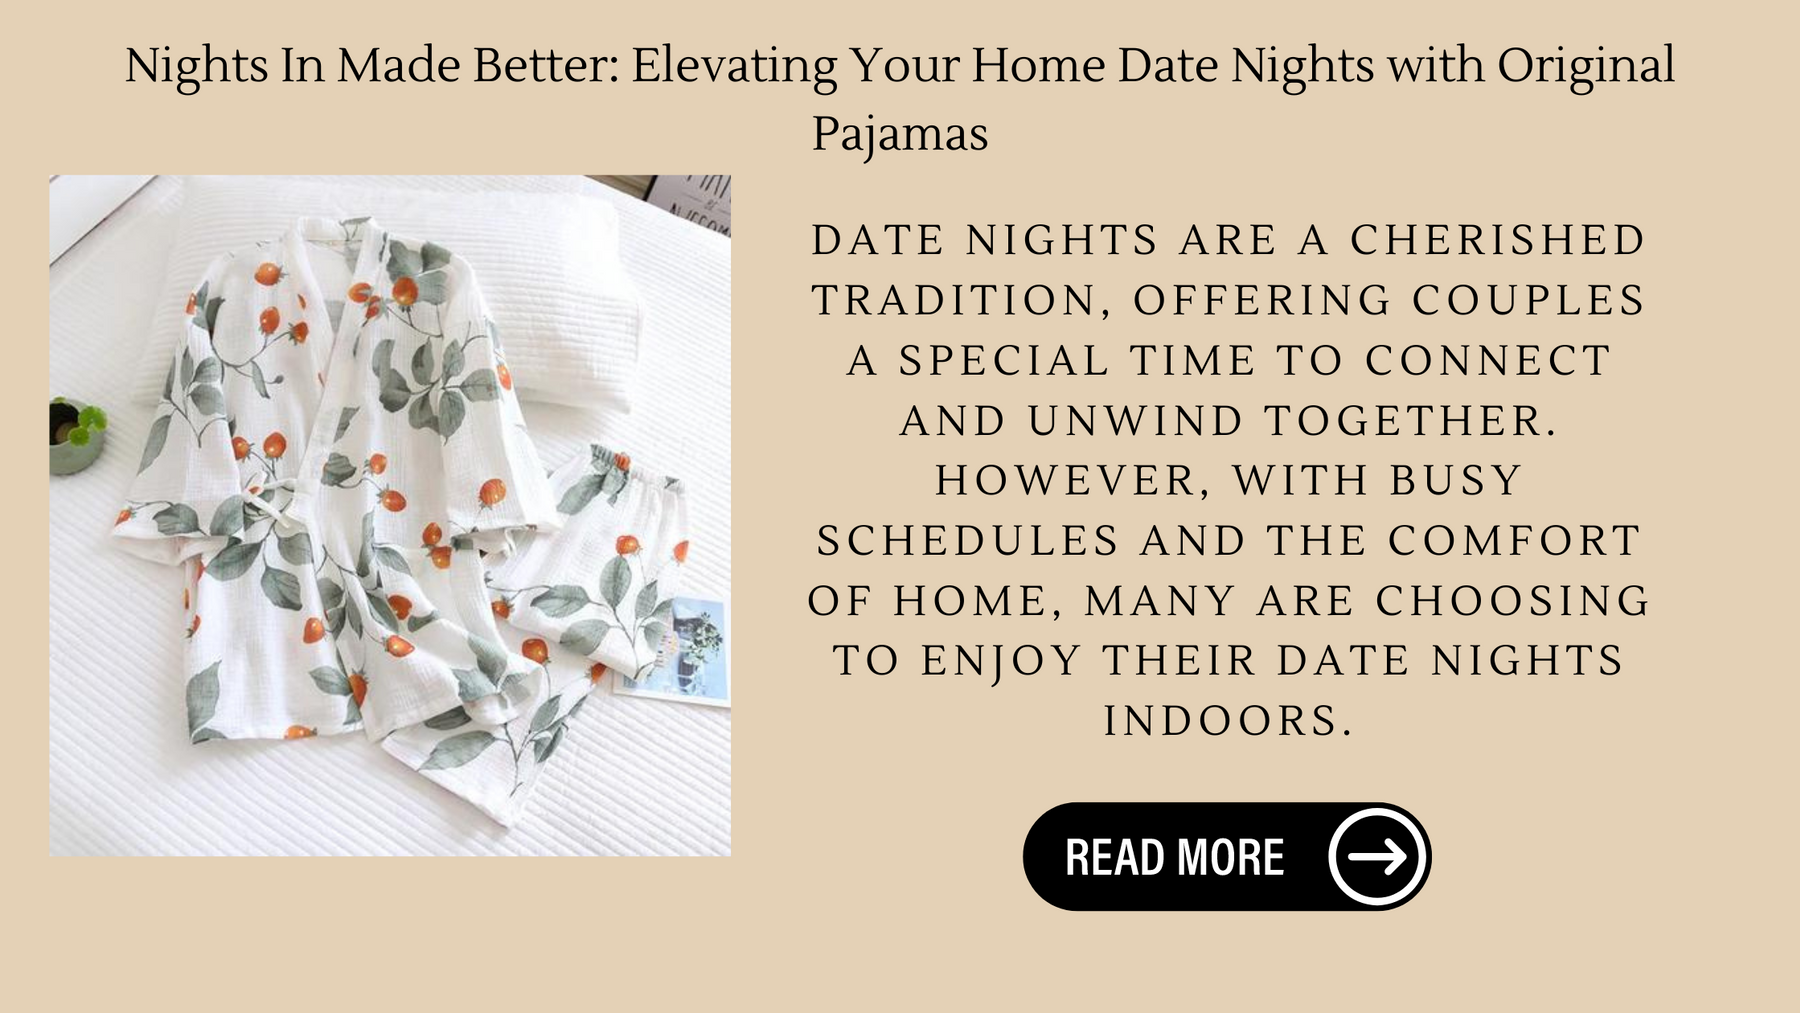 Nights In Made Better: Elevating Your Home Date Nights with Original Pajamas